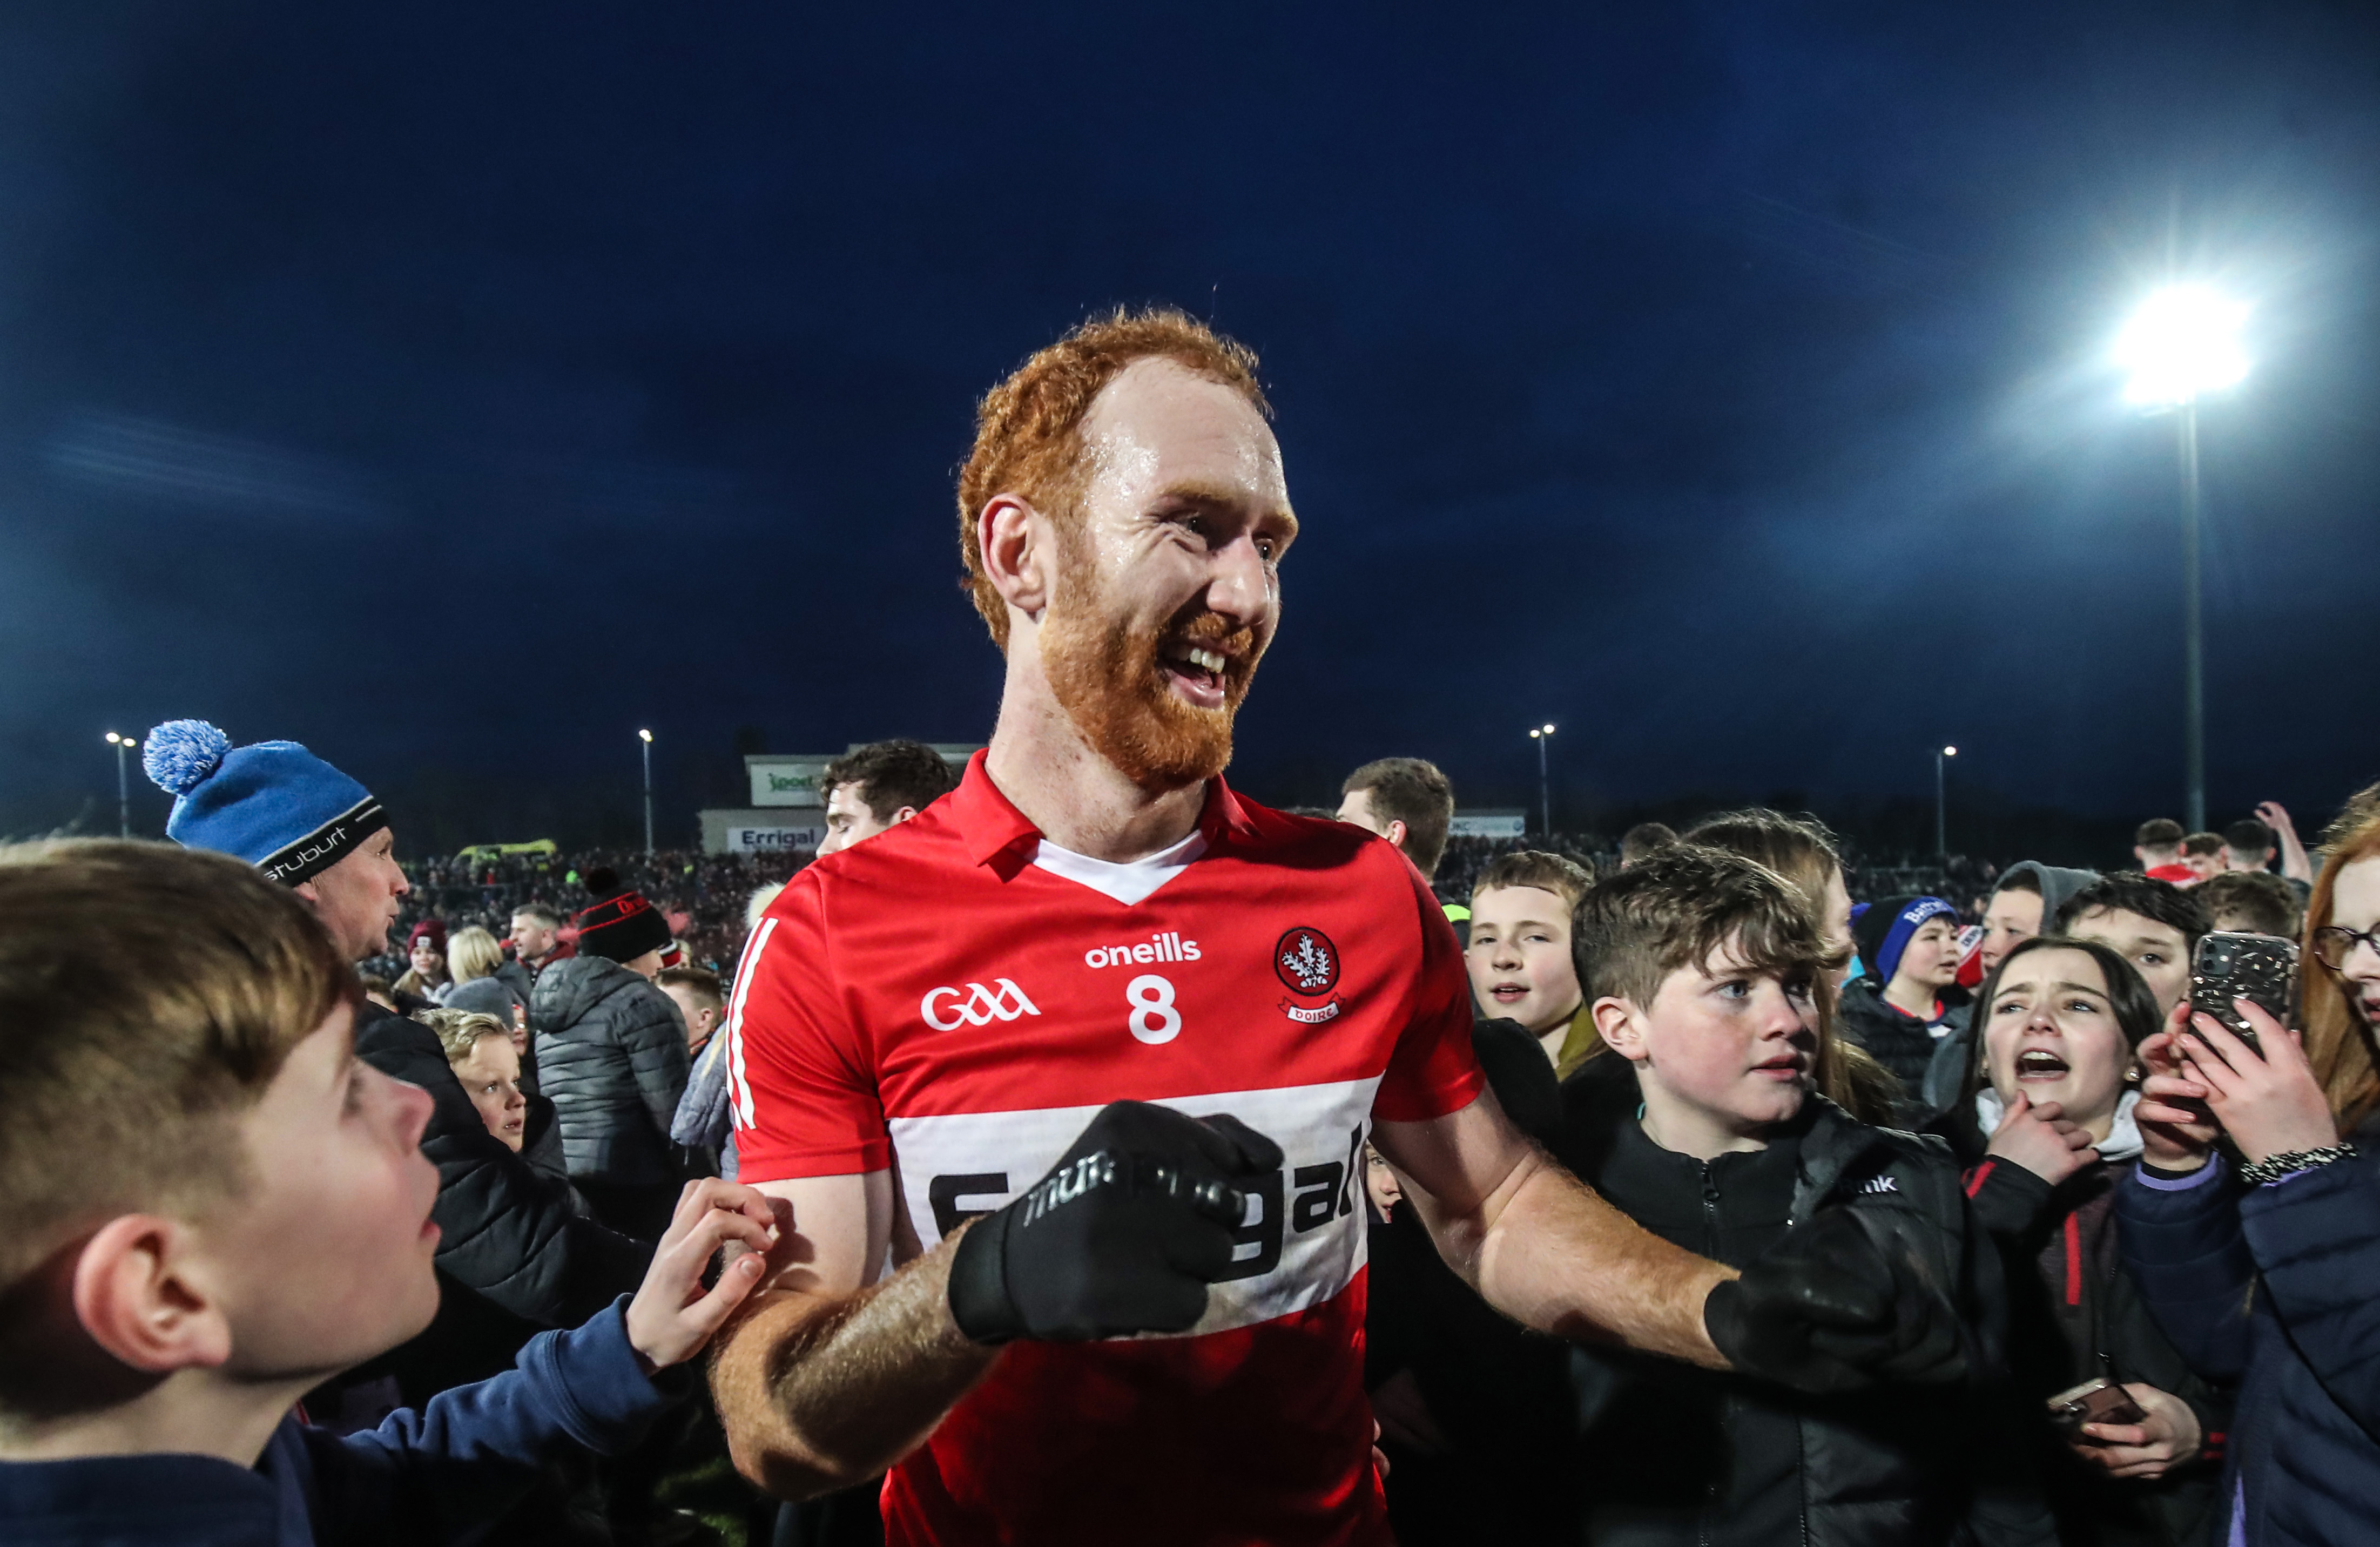 The GAA on X: It's decision time! The 12 counties who will contest the  knock-out stages of the 2023 All-Ireland Senior Football Championship will  be known by Sunday evening when the 4